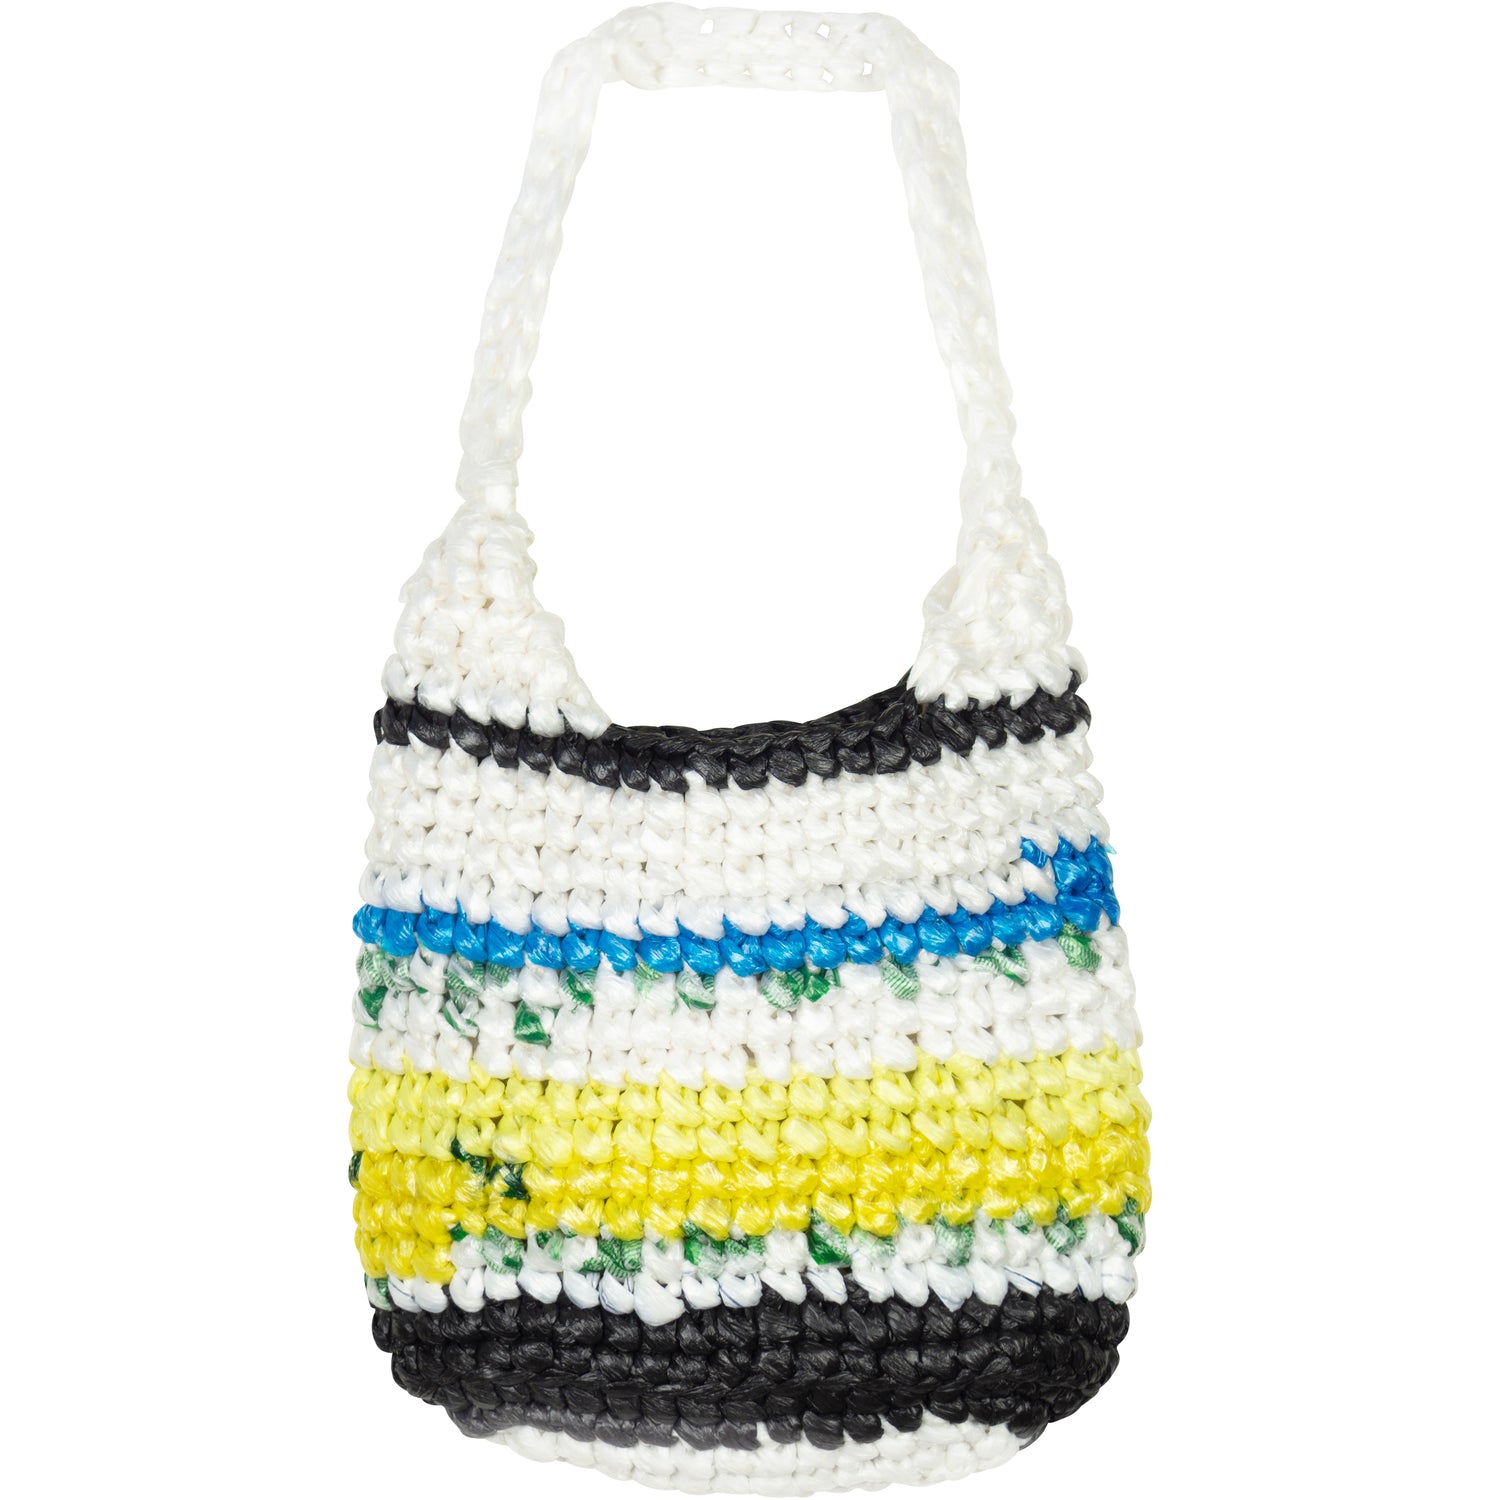 HAND WOVEN RECYCLED PLASTIC BAG